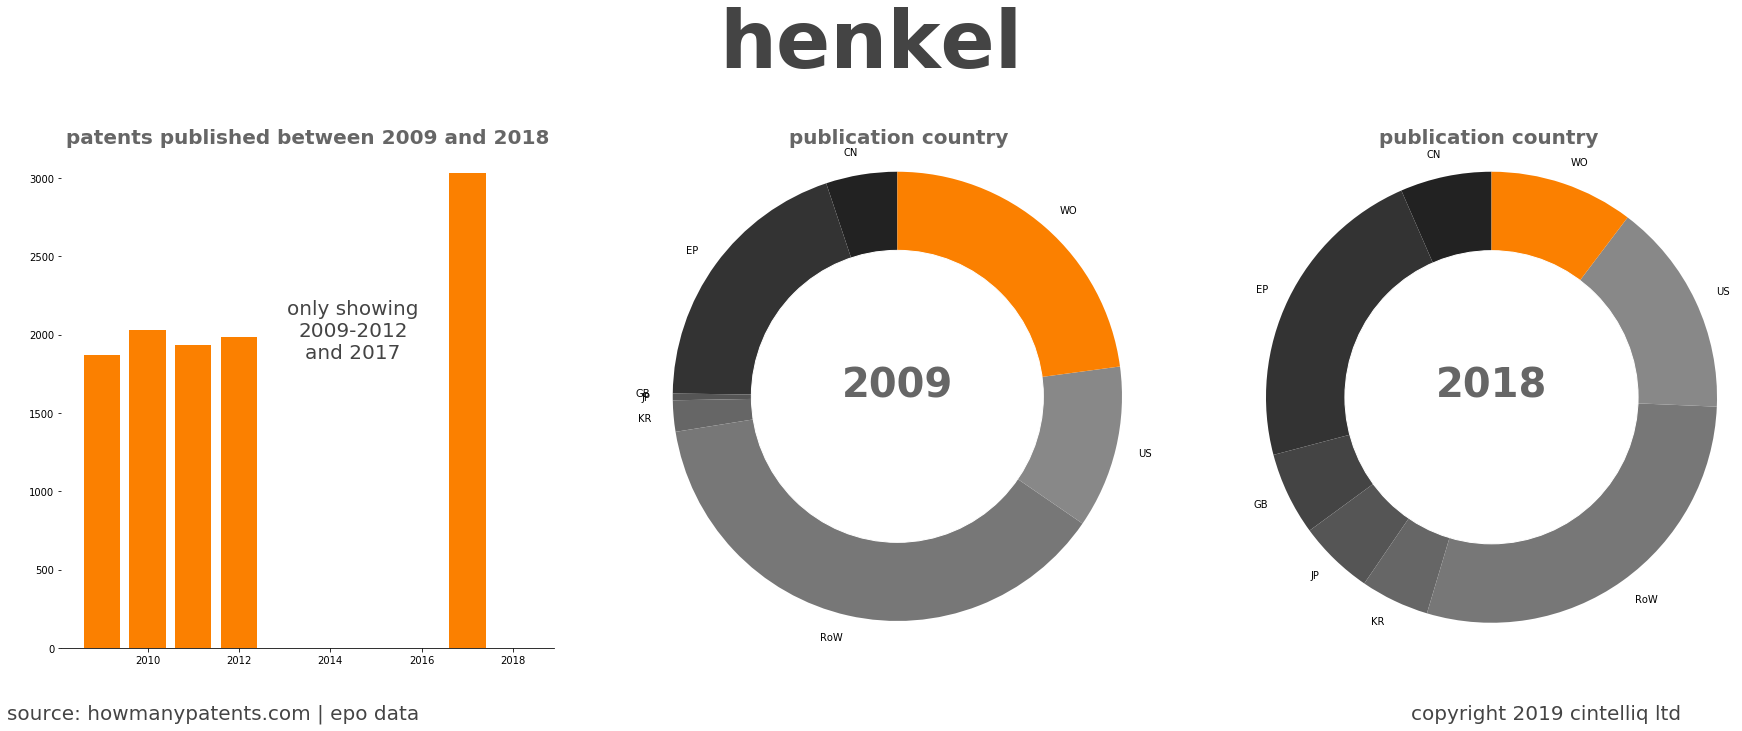 summary of patents for Henkel